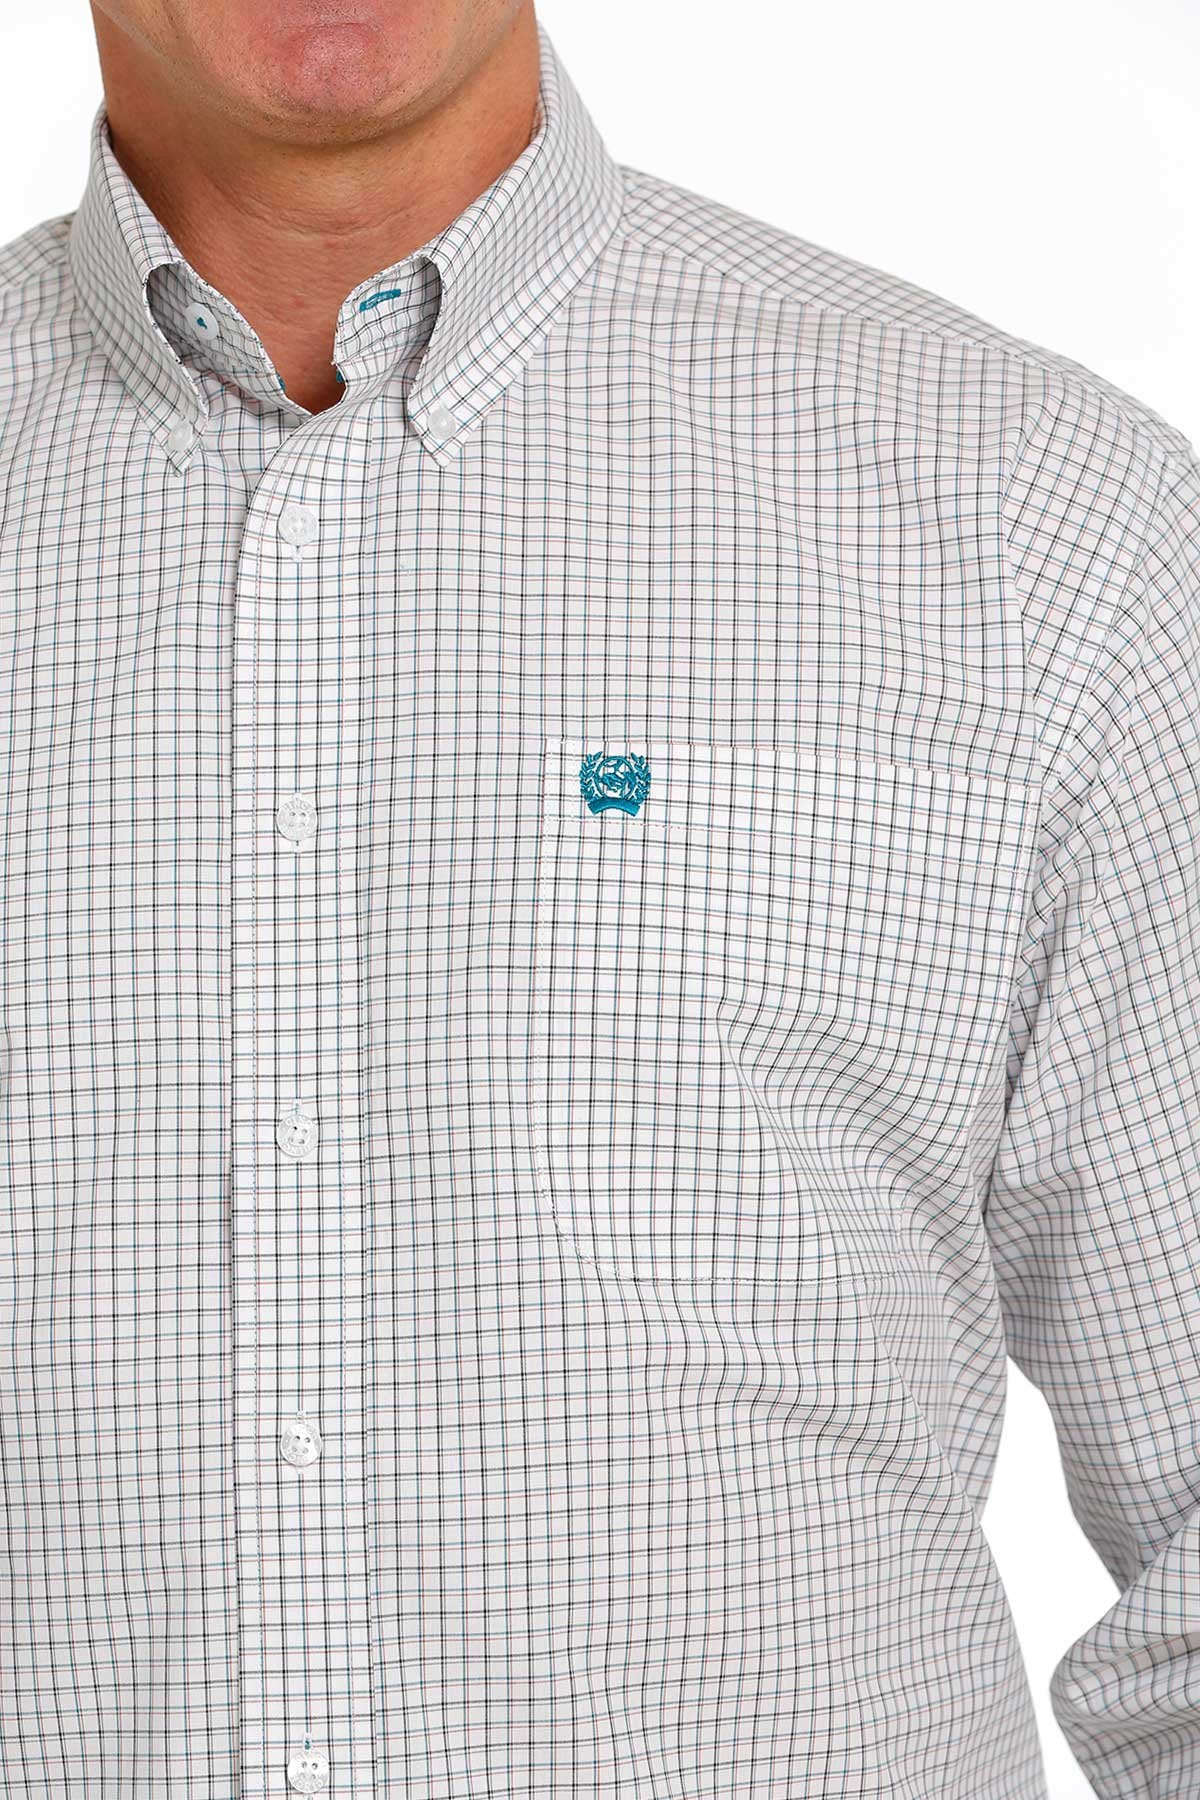 Cinch Mens Plaid Buttoned Down Western L/S Shirt - White/Teal/Grey - MTW1105506